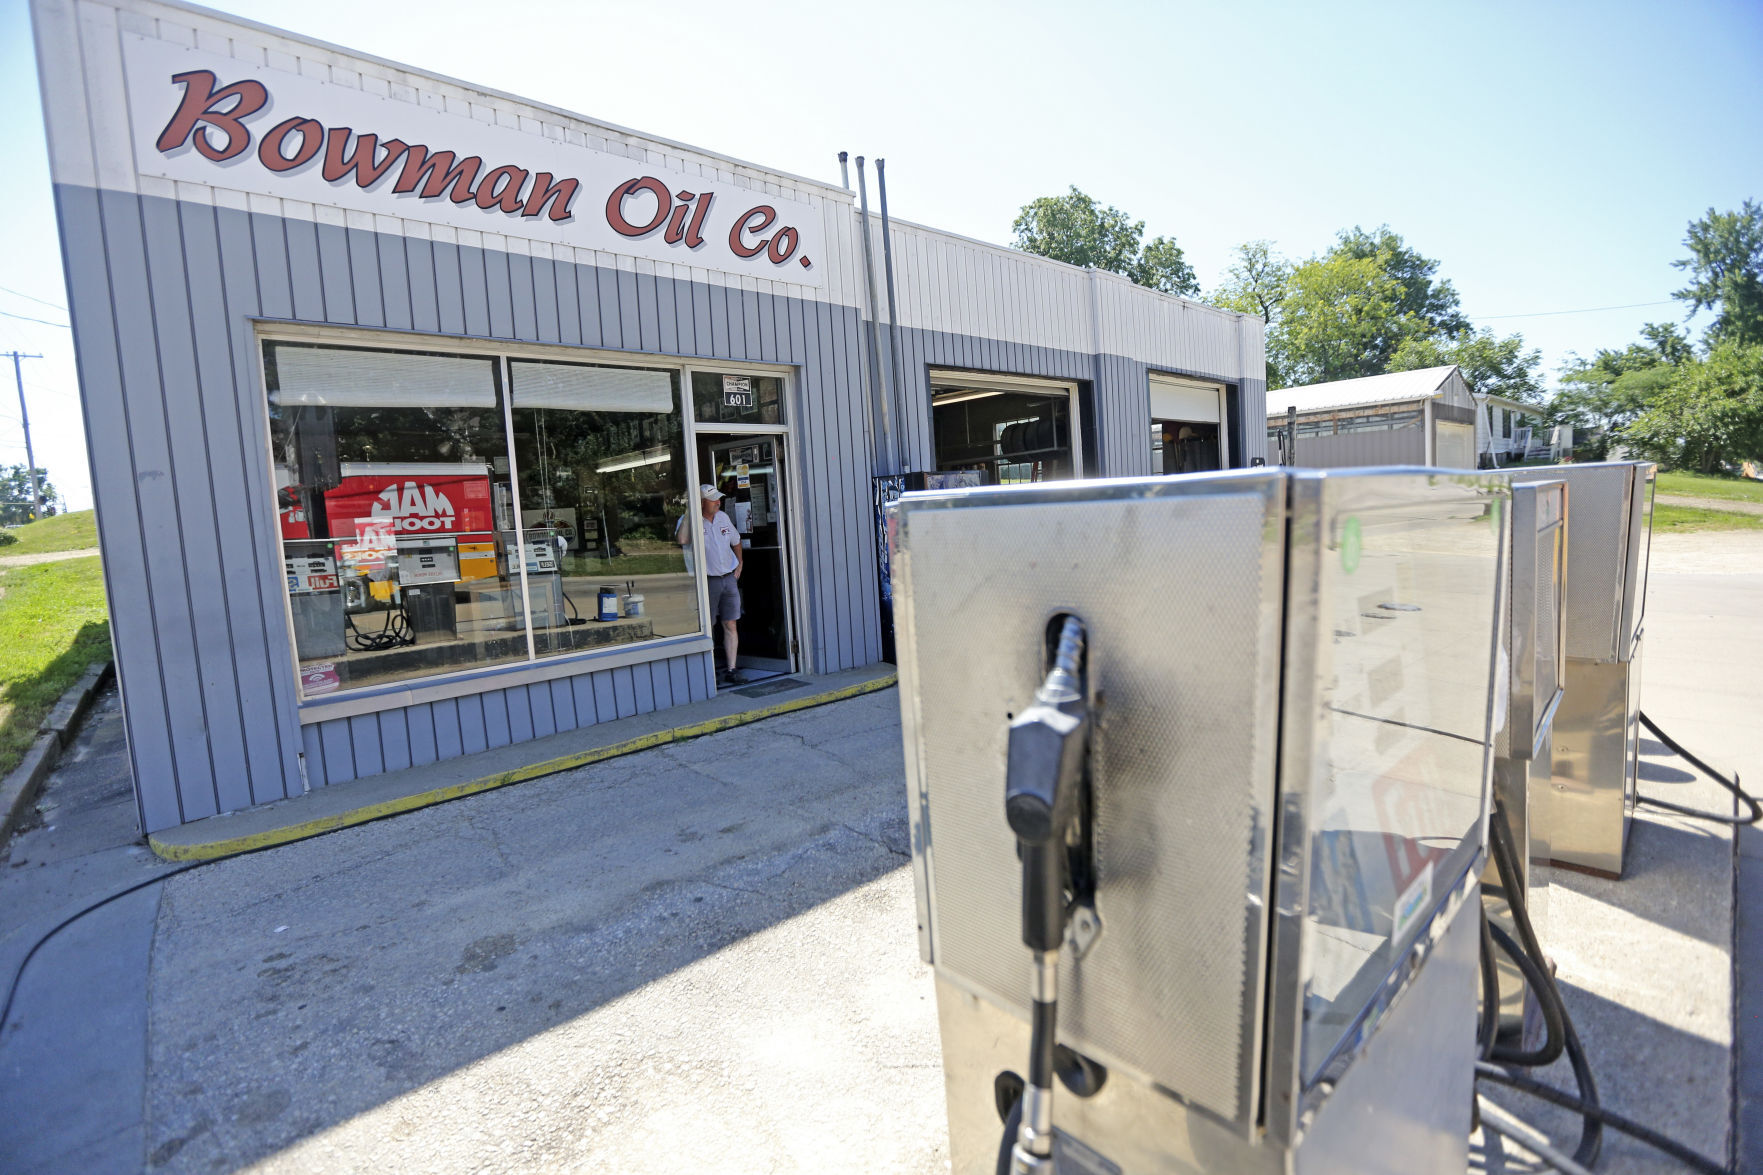 Owner of Bowman Oil Co., Bill Bowman stands in the doorway of the Maquoketa, Iowa business on Wednesday, June 29, 2022. The gas station closed its doors for good on Thursday.    PHOTO CREDIT: Dave Kettering